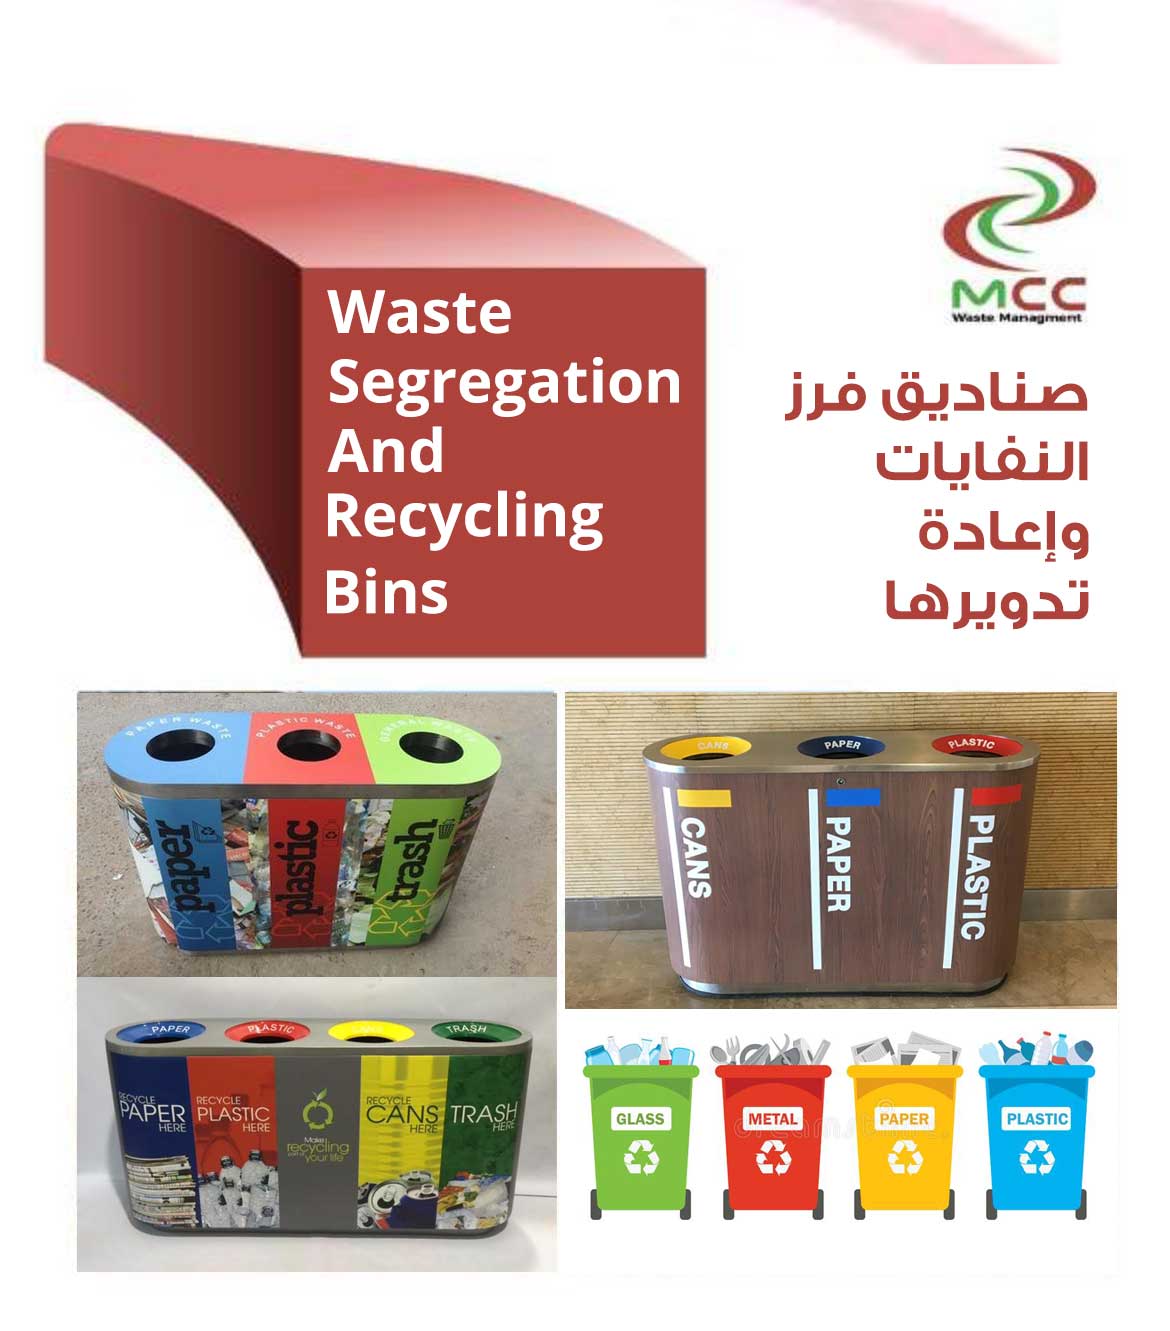 Waste Segregation And Recycling Bins in Qatar | Qatar modern cleaning and waste management company MCC Qatar is the leading Waste Management companies in Qatar recycling | qatar waste management companies | manage of waste in Qatar